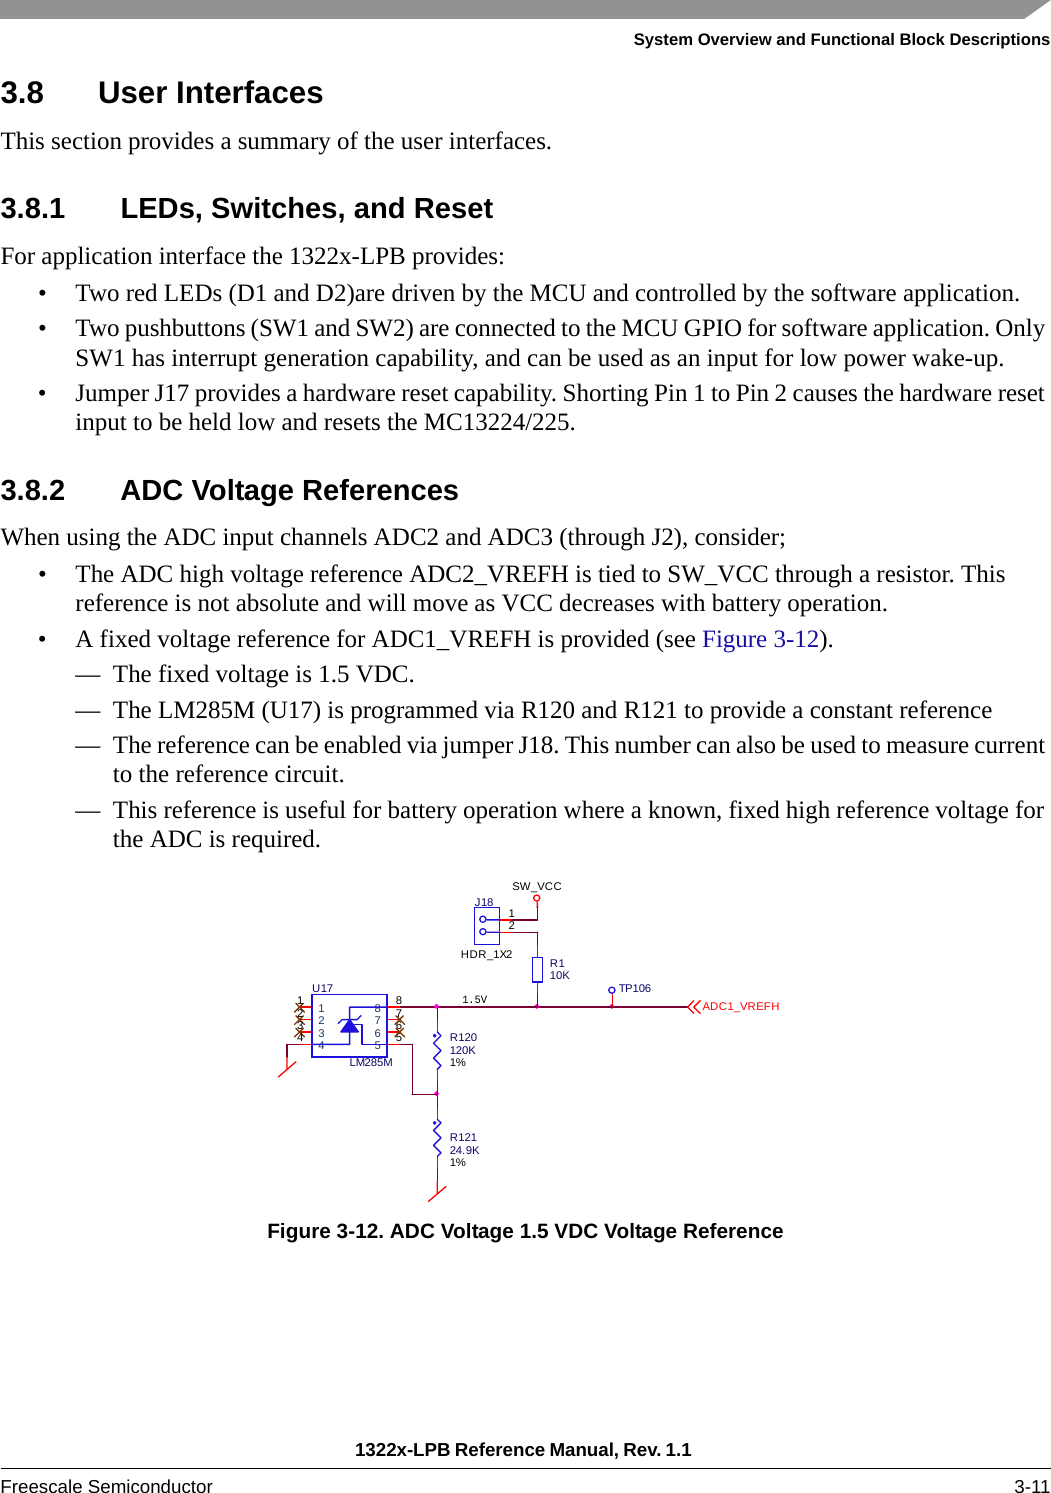 System Overview and Functional Block Descriptions1322x-LPB Reference Manual, Rev. 1.1 Freescale Semiconductor 3-113.8 User InterfacesThis section provides a summary of the user interfaces.3.8.1 LEDs, Switches, and ResetFor application interface the 1322x-LPB provides:• Two red LEDs (D1 and D2)are driven by the MCU and controlled by the software application.• Two pushbuttons (SW1 and SW2) are connected to the MCU GPIO for software application. Only SW1 has interrupt generation capability, and can be used as an input for low power wake-up.• Jumper J17 provides a hardware reset capability. Shorting Pin 1 to Pin 2 causes the hardware reset input to be held low and resets the MC13224/225.3.8.2 ADC Voltage ReferencesWhen using the ADC input channels ADC2 and ADC3 (through J2), consider;• The ADC high voltage reference ADC2_VREFH is tied to SW_VCC through a resistor. This reference is not absolute and will move as VCC decreases with battery operation.• A fixed voltage reference for ADC1_VREFH is provided (see Figure 3-12).— The fixed voltage is 1.5 VDC.— The LM285M (U17) is programmed via R120 and R121 to provide a constant reference— The reference can be enabled via jumper J18. This number can also be used to measure current to the reference circuit.— This reference is useful for battery operation where a known, fixed high reference voltage for the ADC is required.Figure 3-12. ADC Voltage 1.5 VDC Voltage Reference R110KSW_VCC12J18HDR_1X2R120120K1%R12124.9K1%TP1061.5V1122334455667788U17LM285MADC1_VREFH